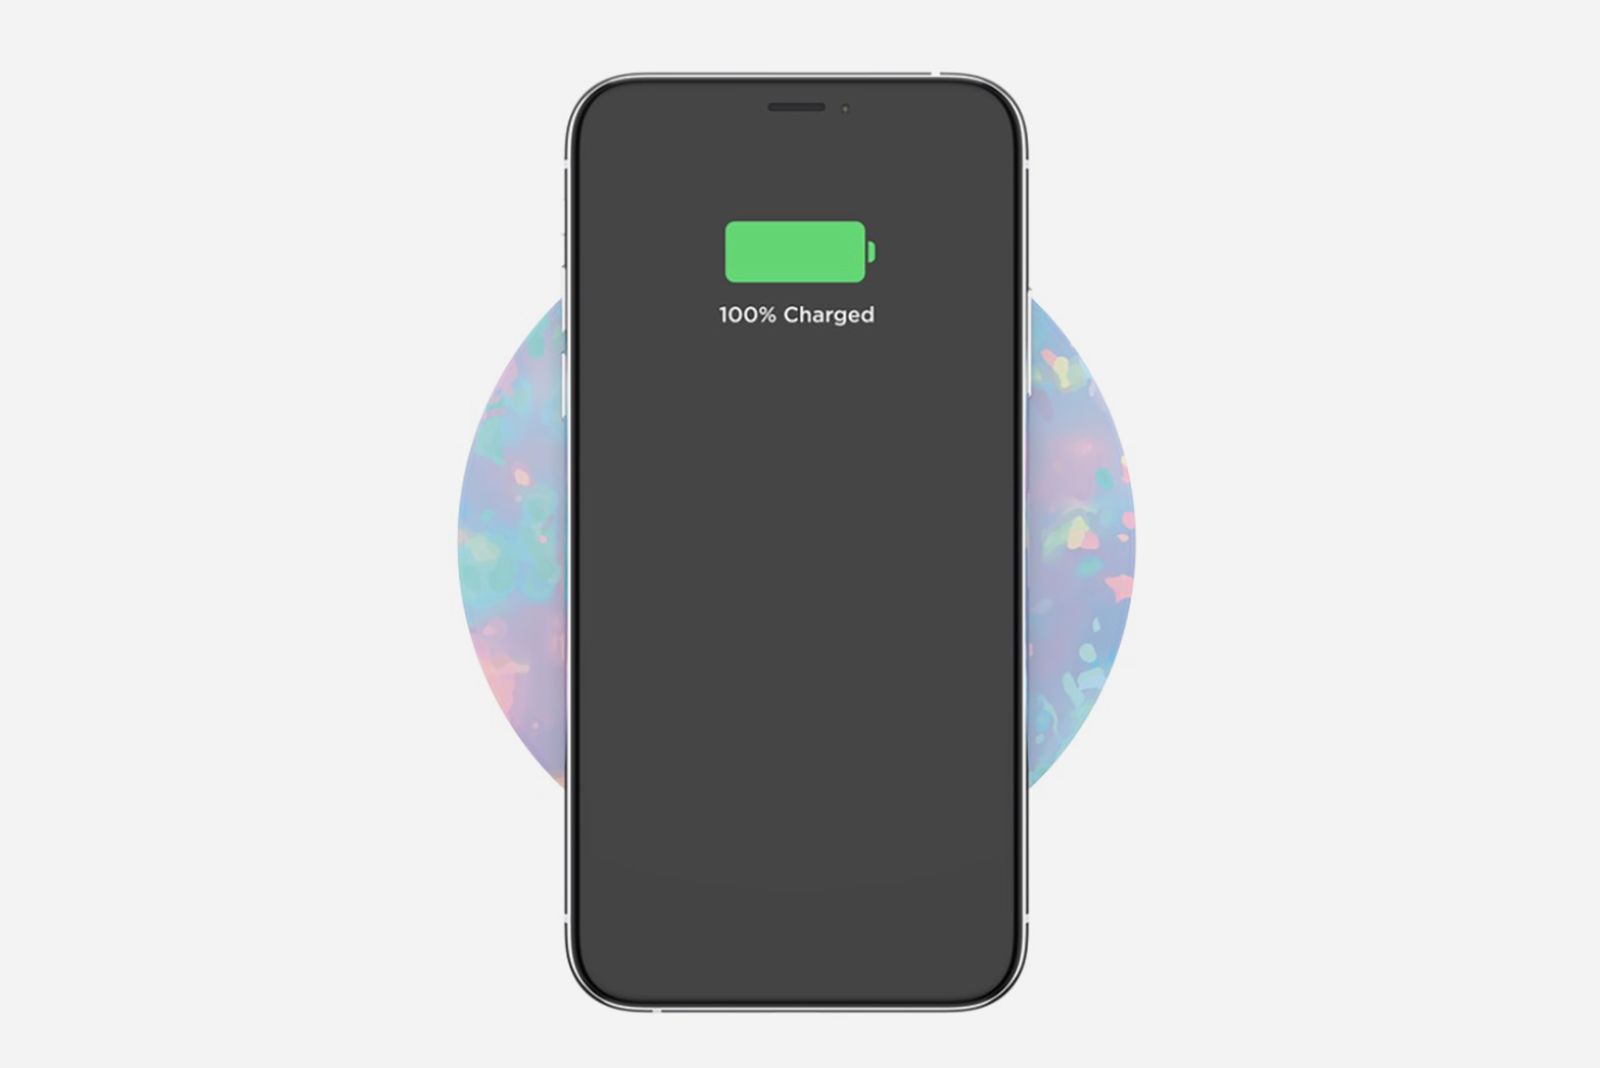 PopSockets new wireless charger will work with your phone grip image 1